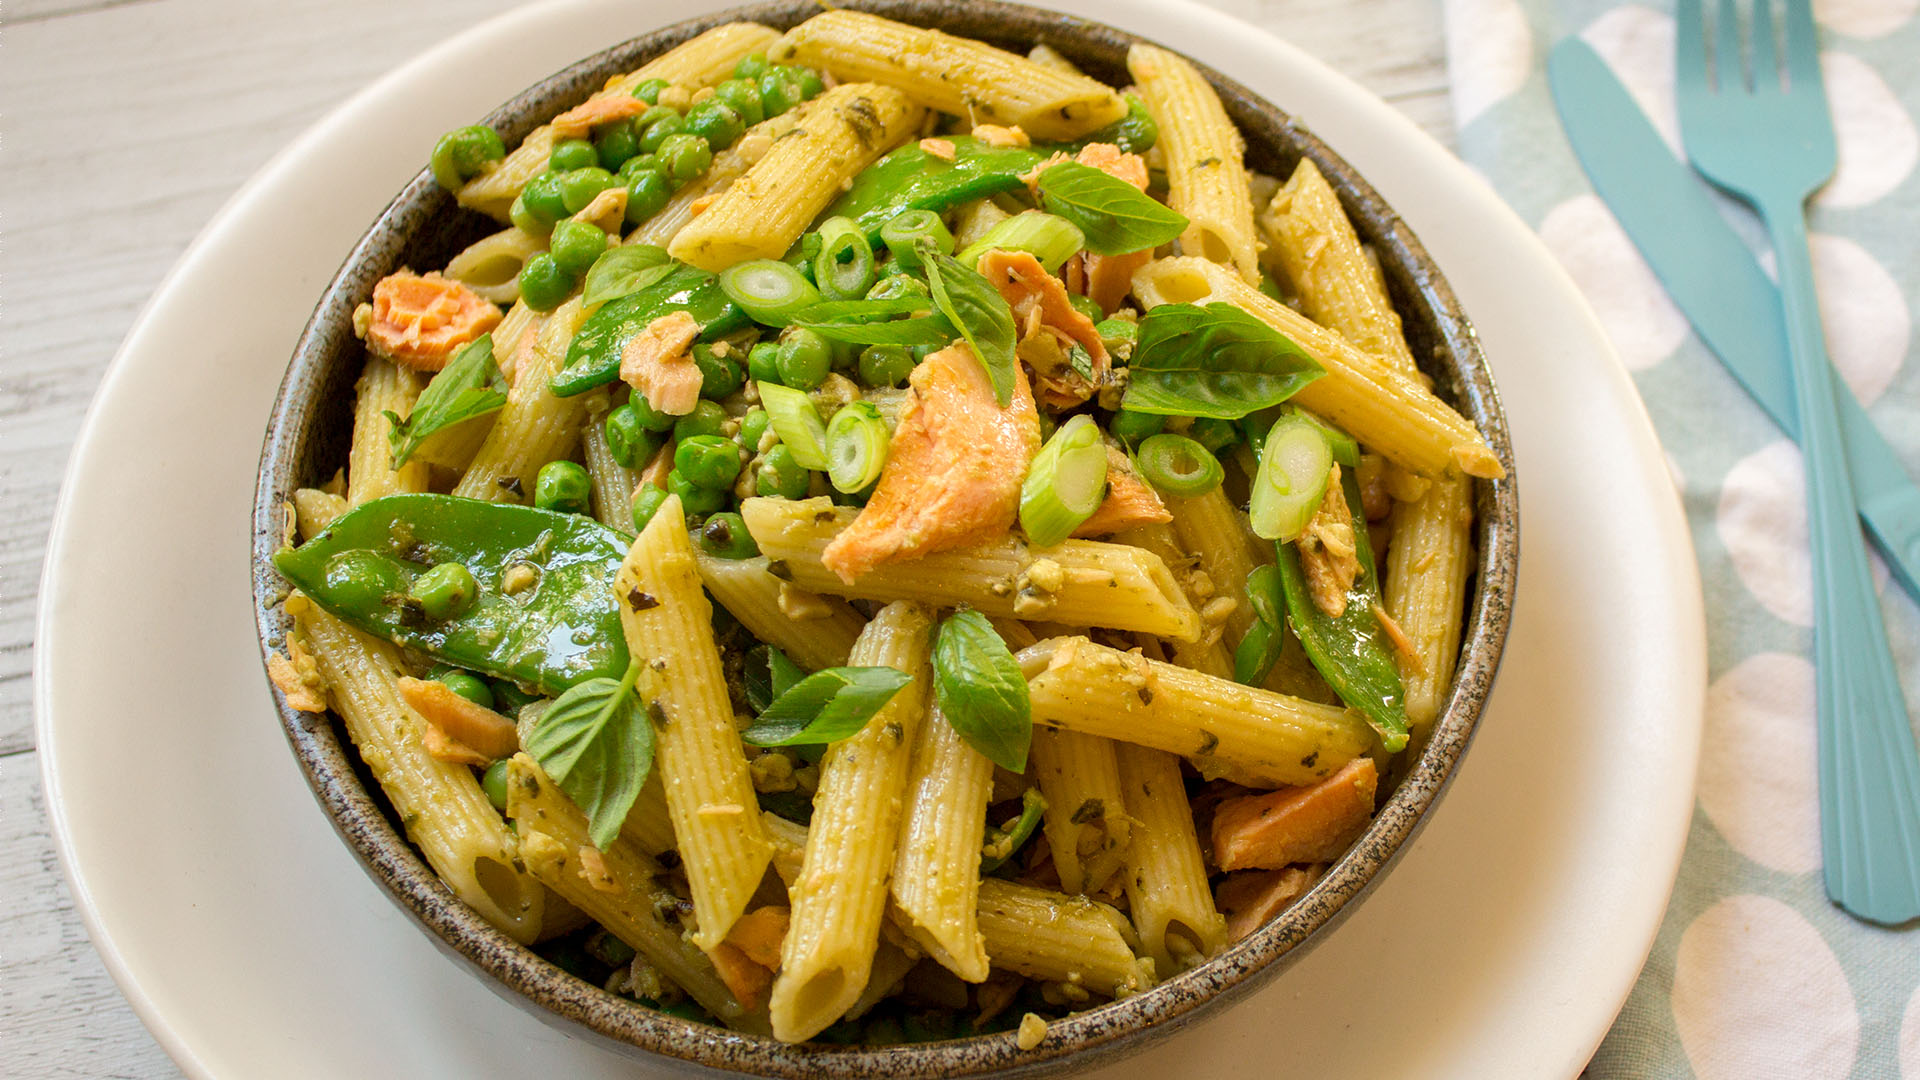 Salmon pesto pea pasta - a quick and easy meal - Seafood Experts